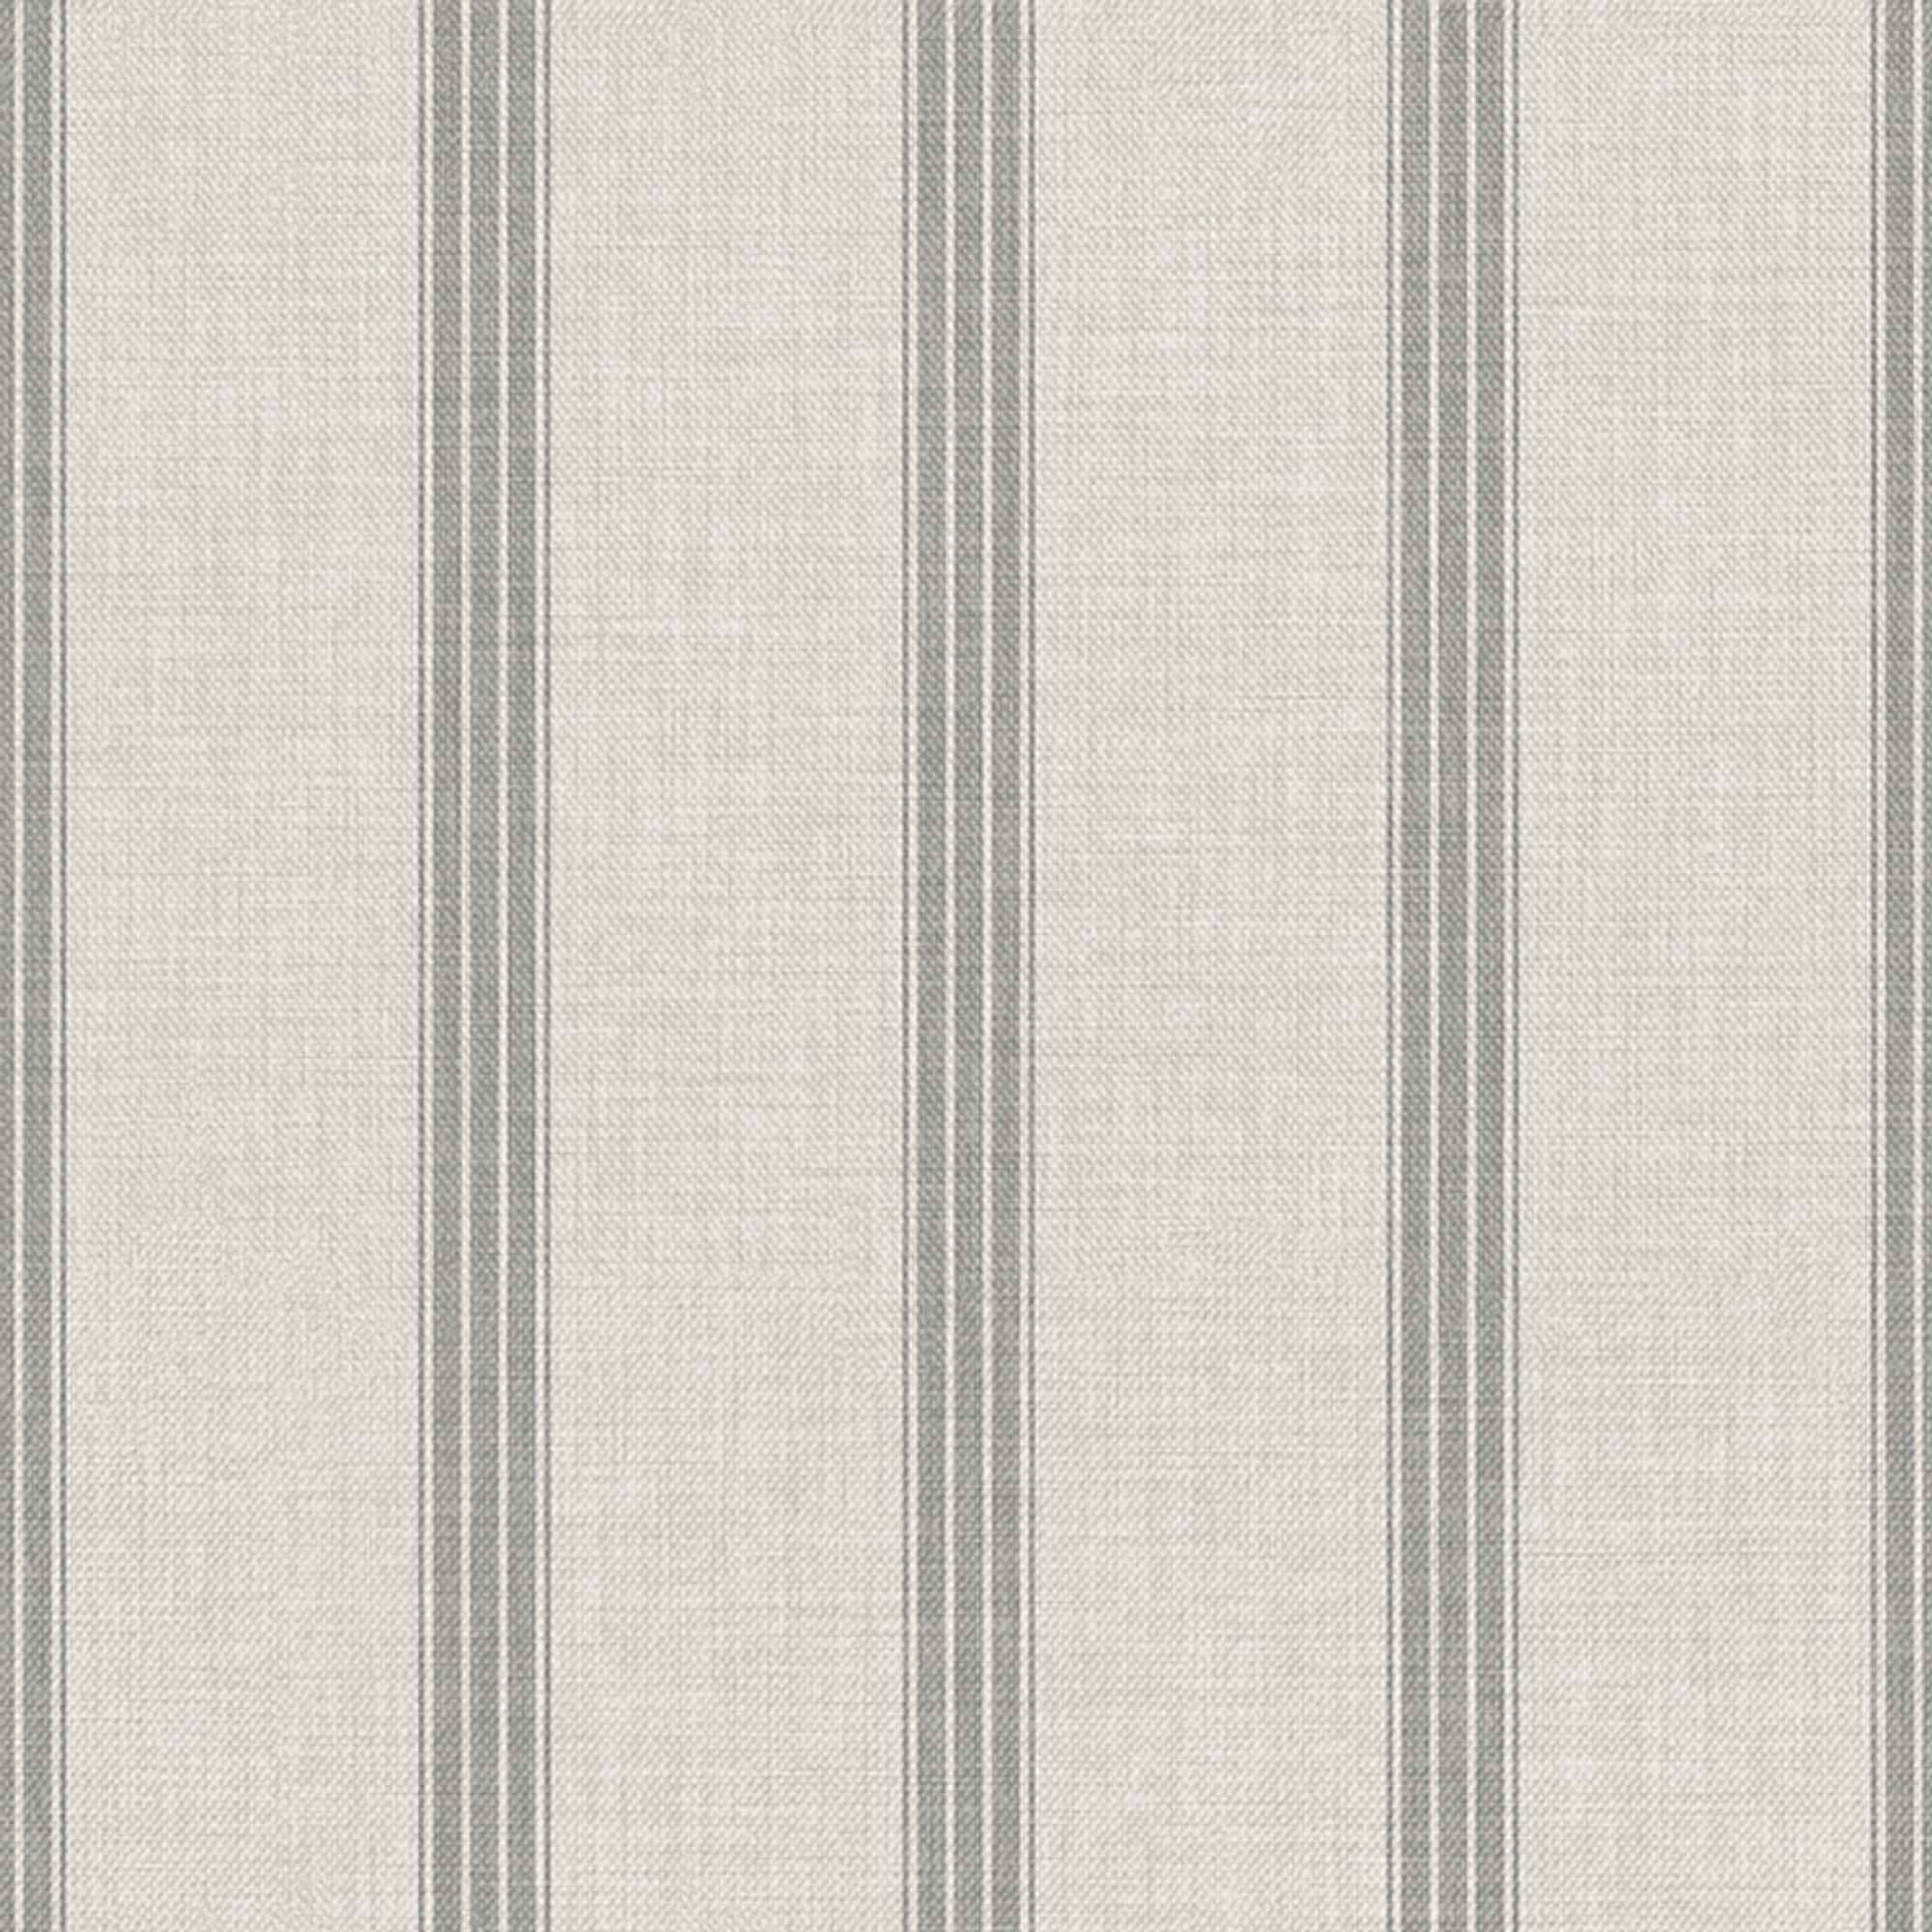 Superfresco Easy Natural Fabric effect Stripe Smooth Wallpaper Sample